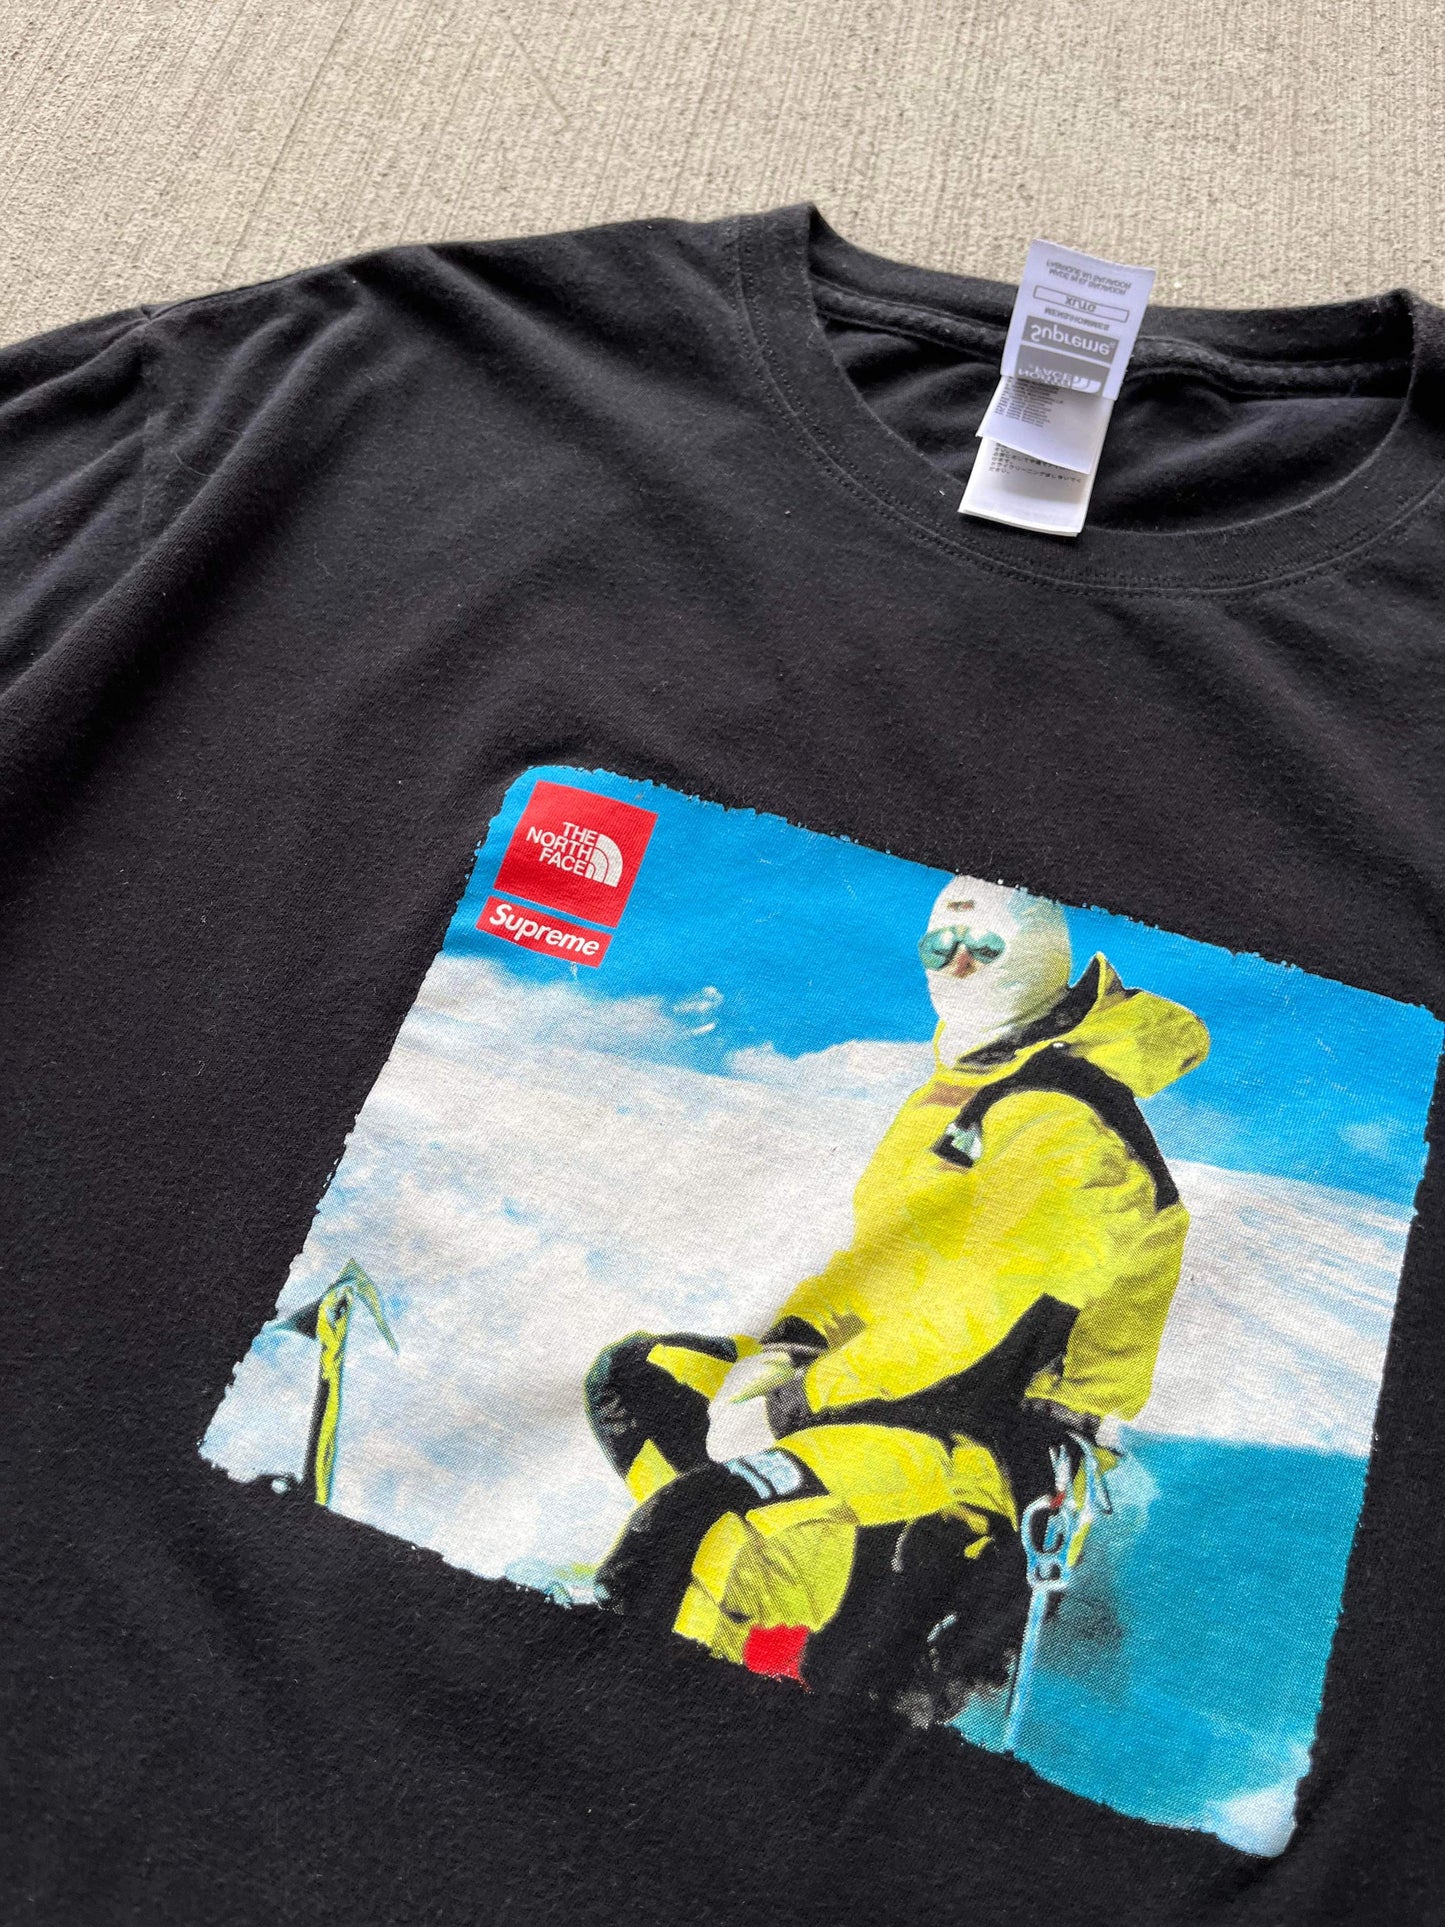 (XL/2X) Supreme x The North Face Tee